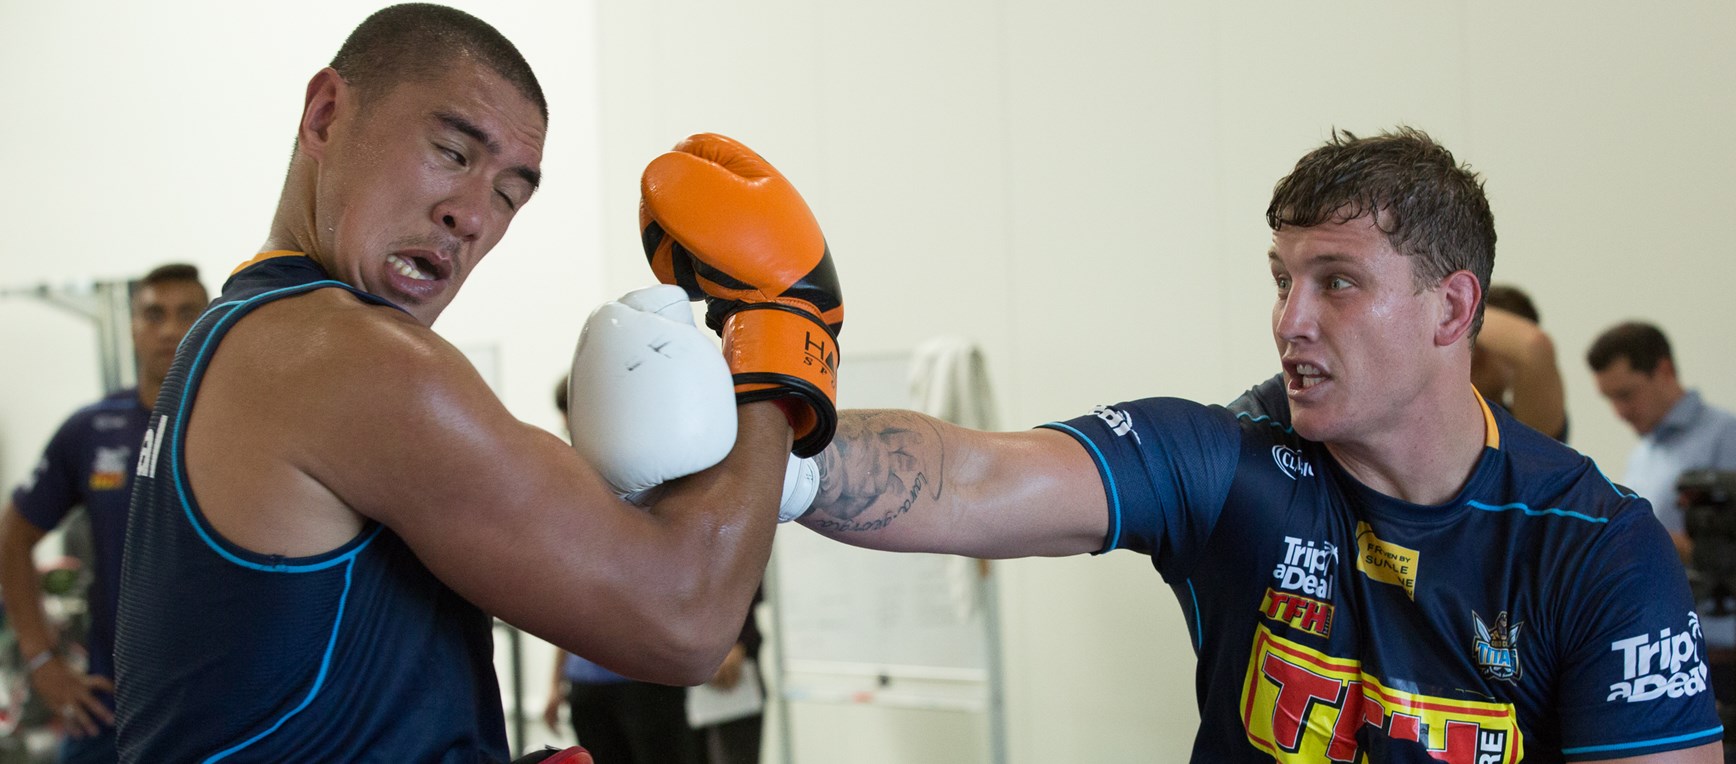 GALLERY: Boxing Session